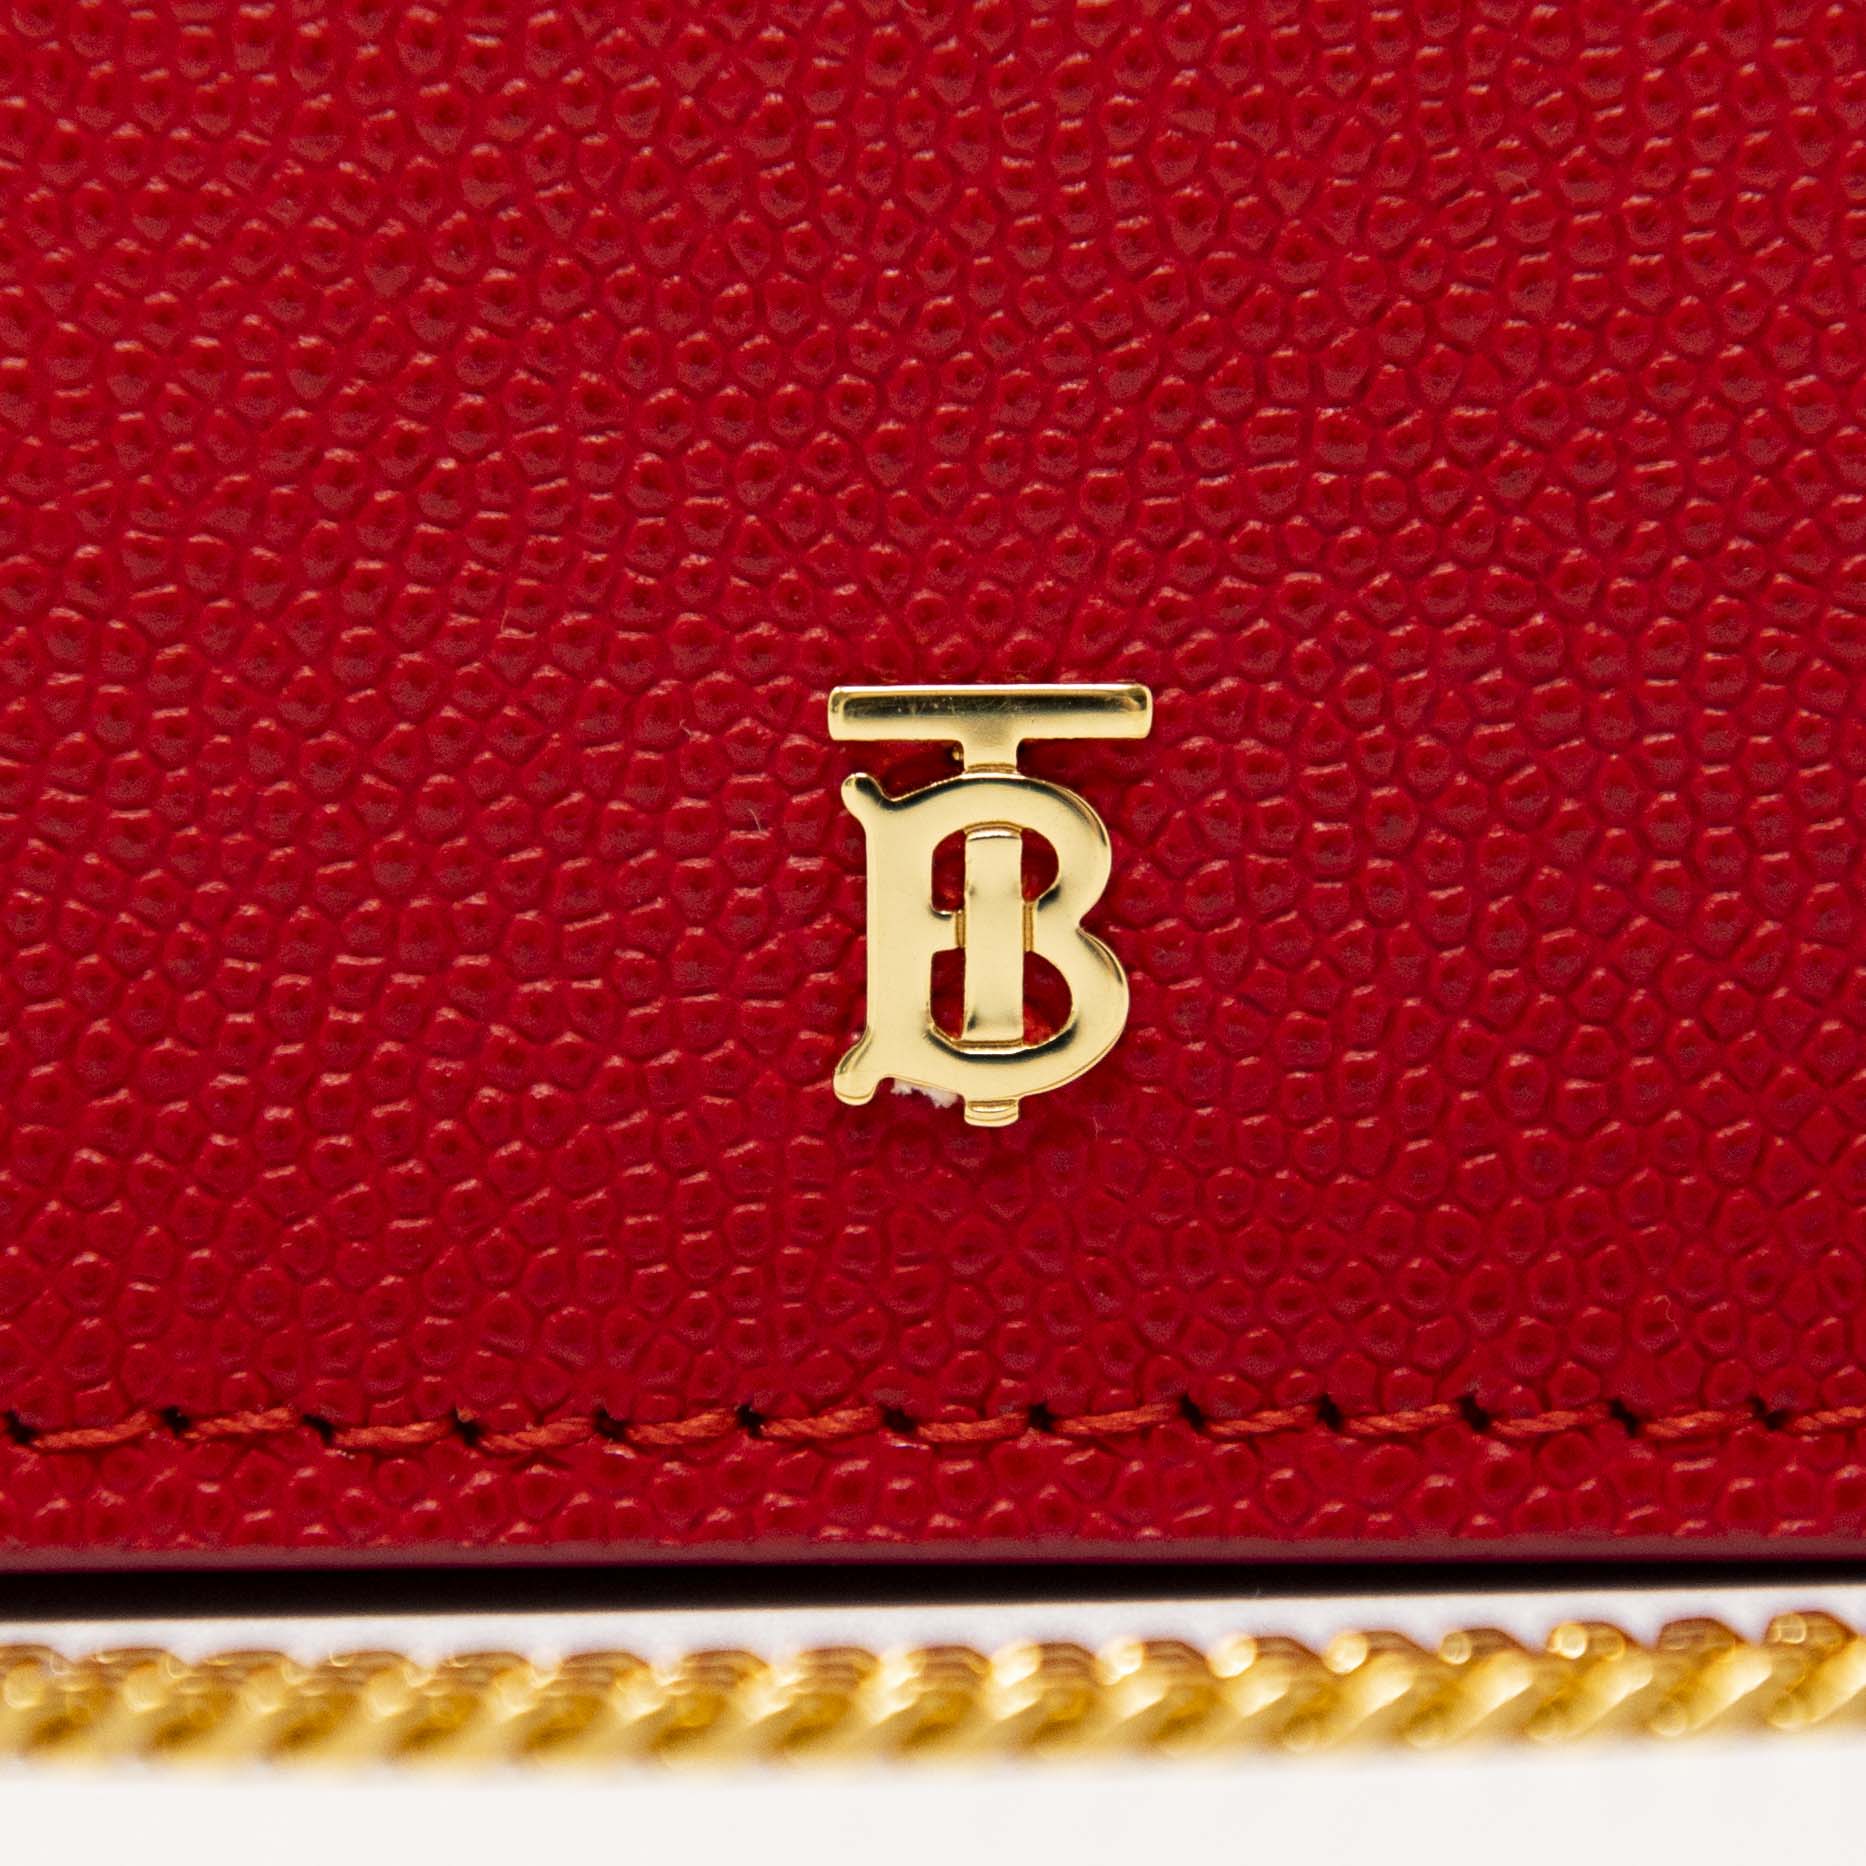 Burberry Red Card Holder On Chain